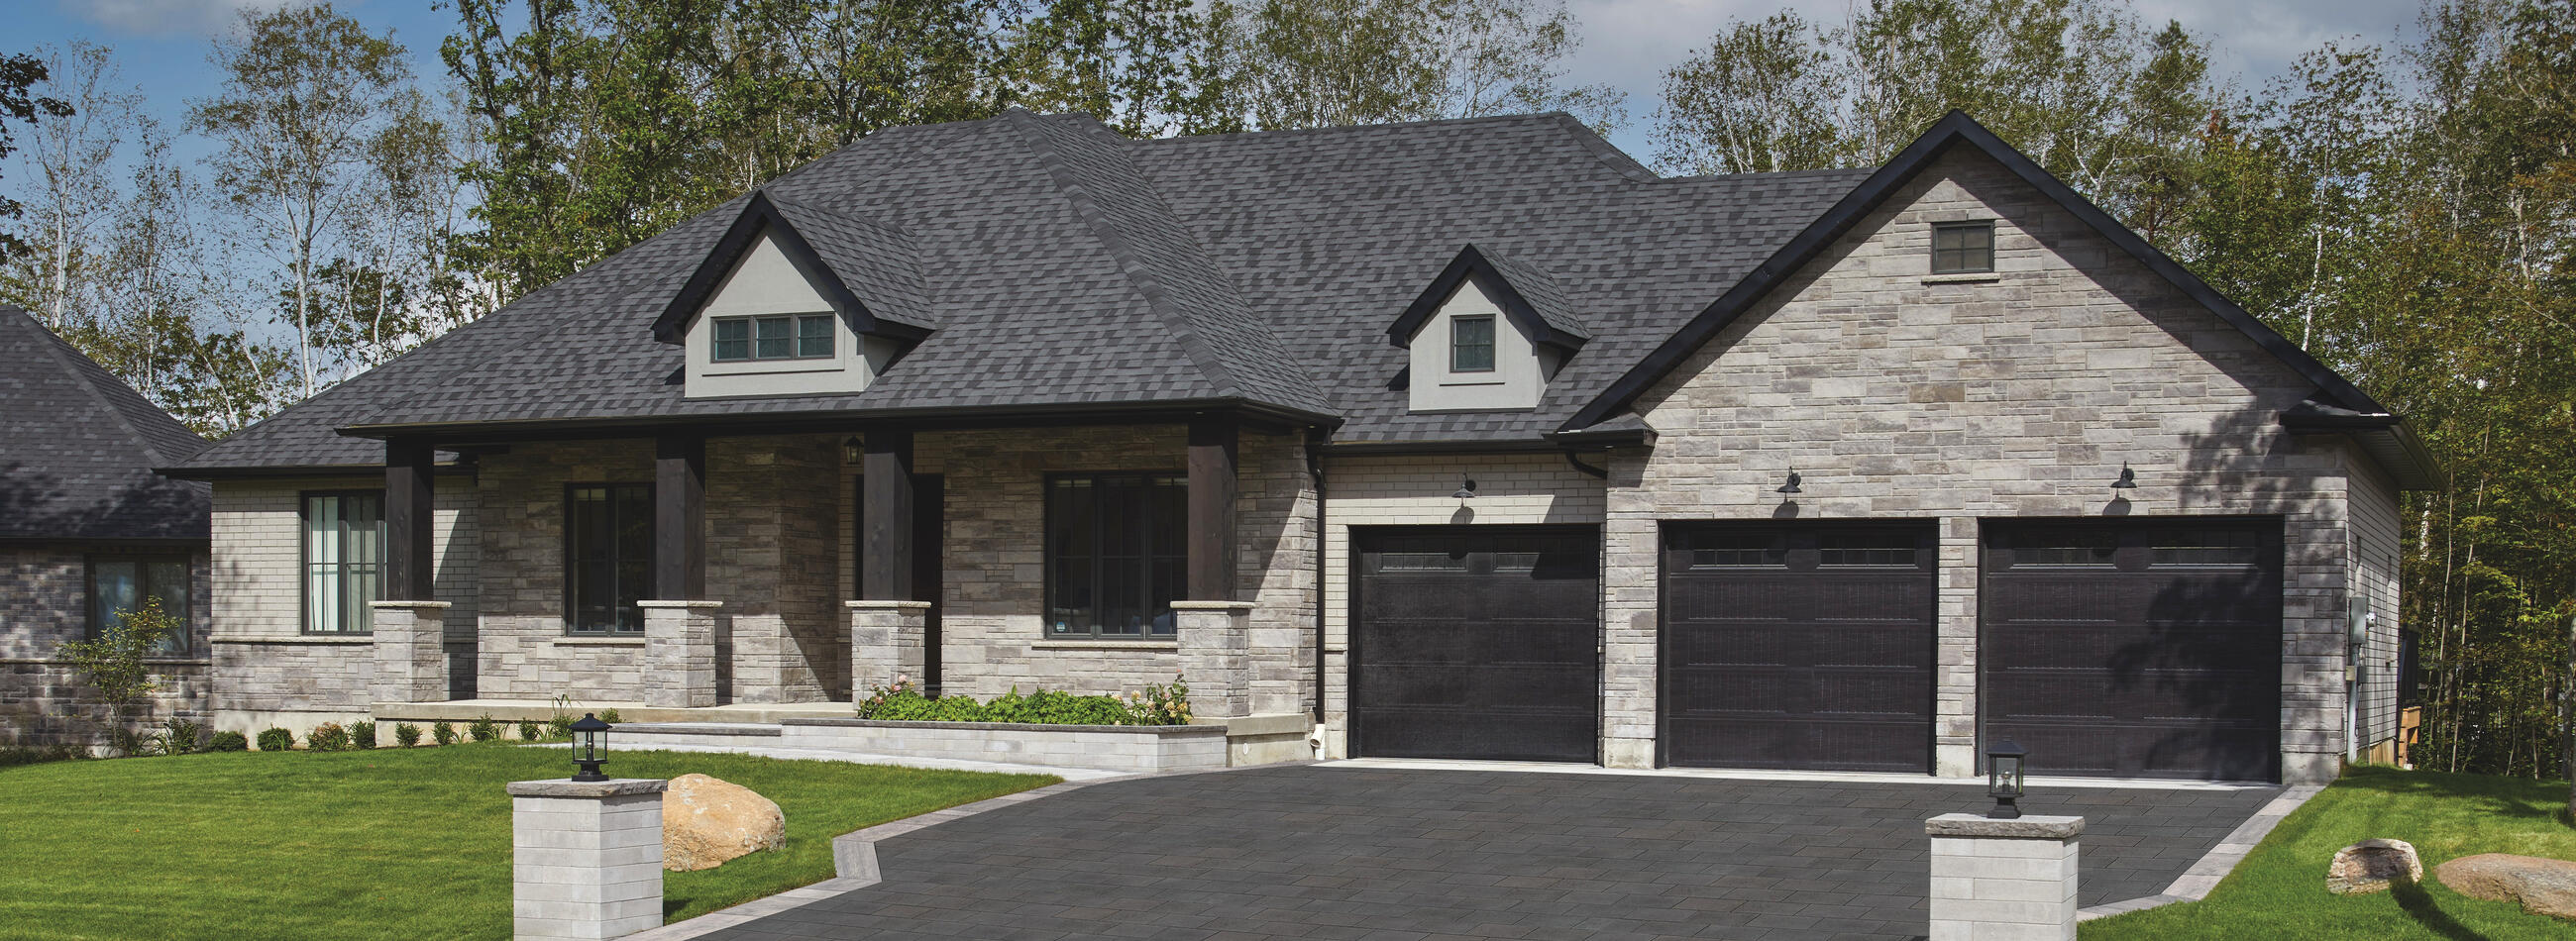 House using Brampton Brick and Oaks Landscape products 